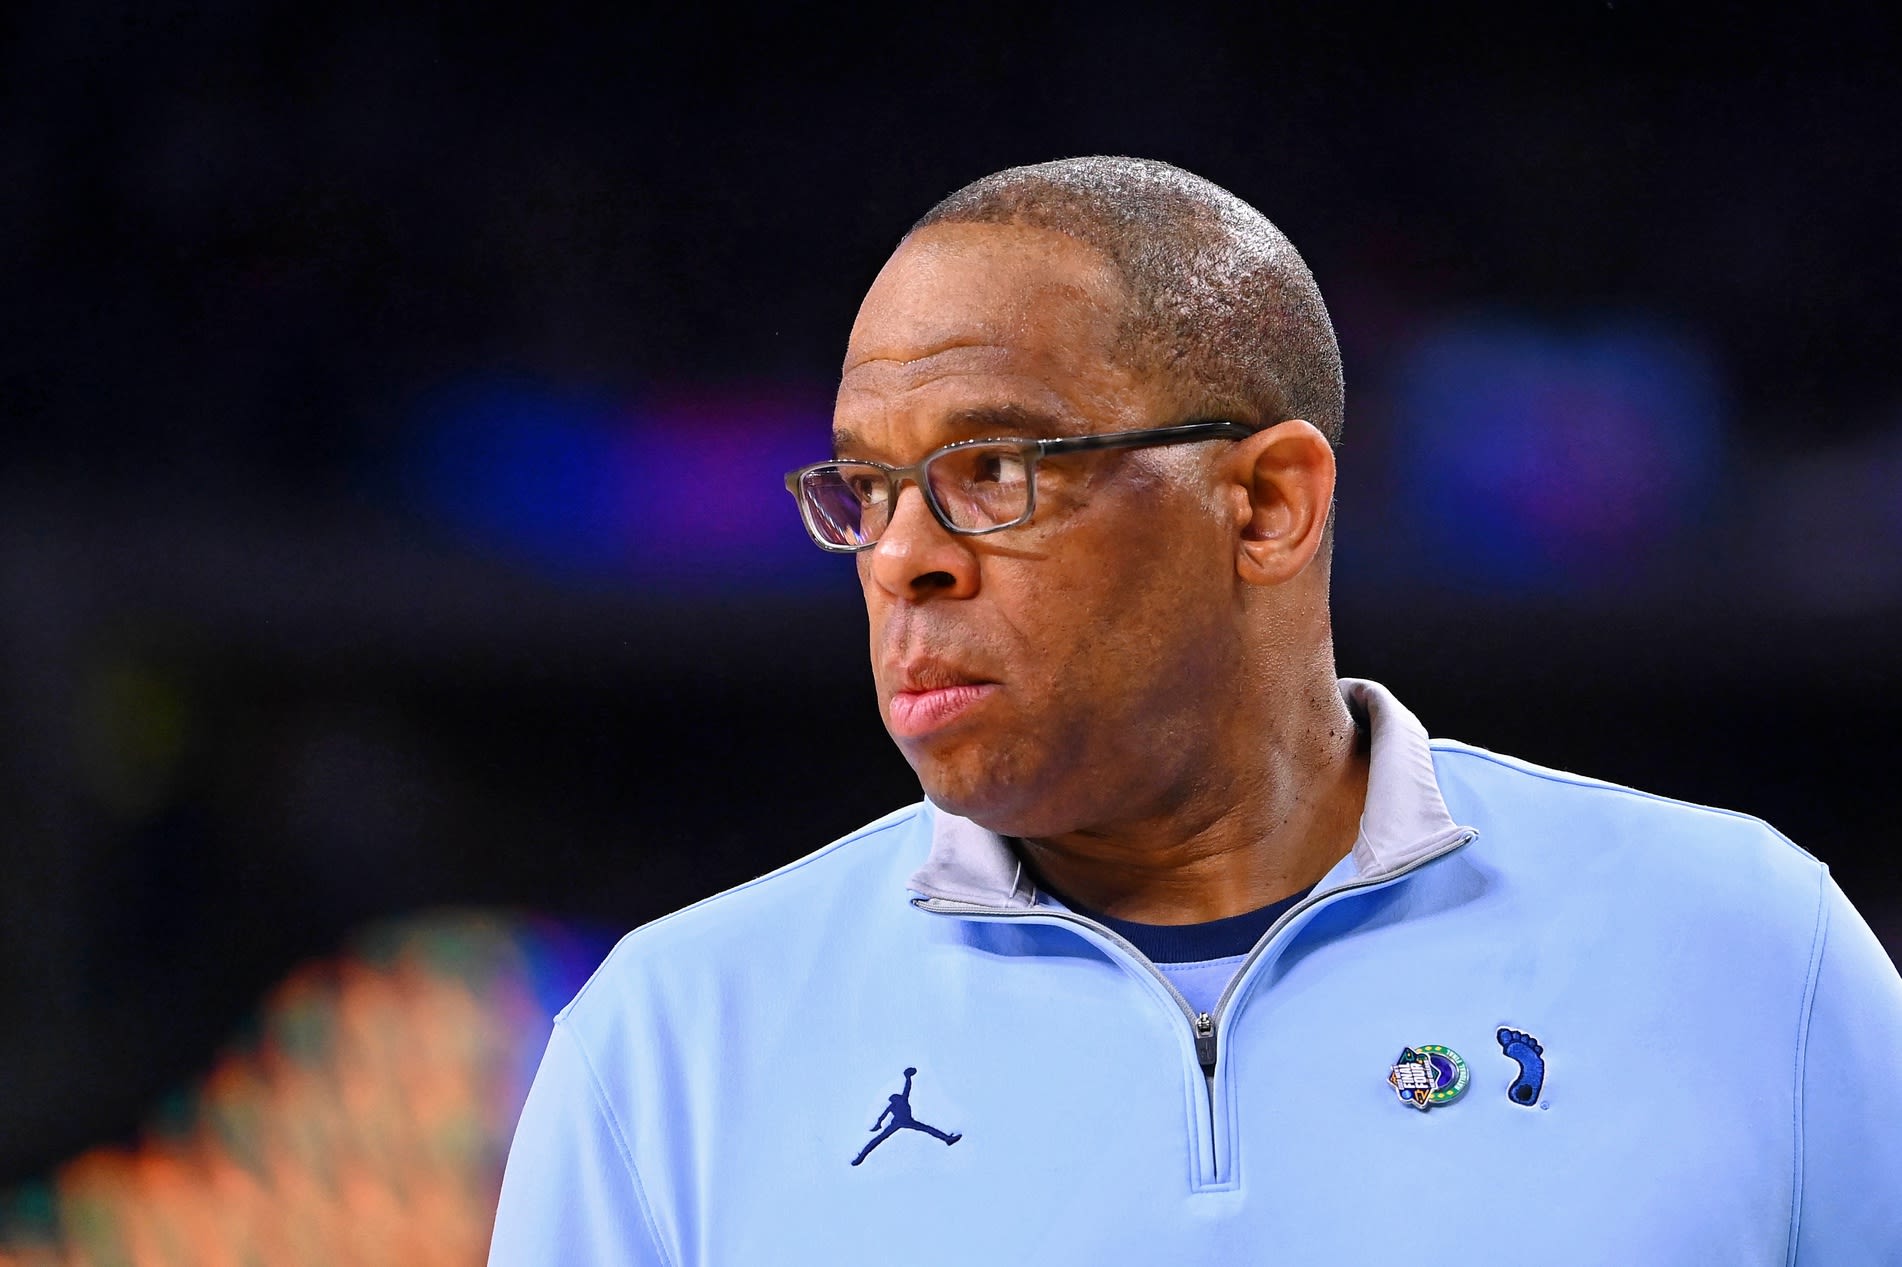 Tar Heels still a top team in latest CBS Sports Top 25 and 1